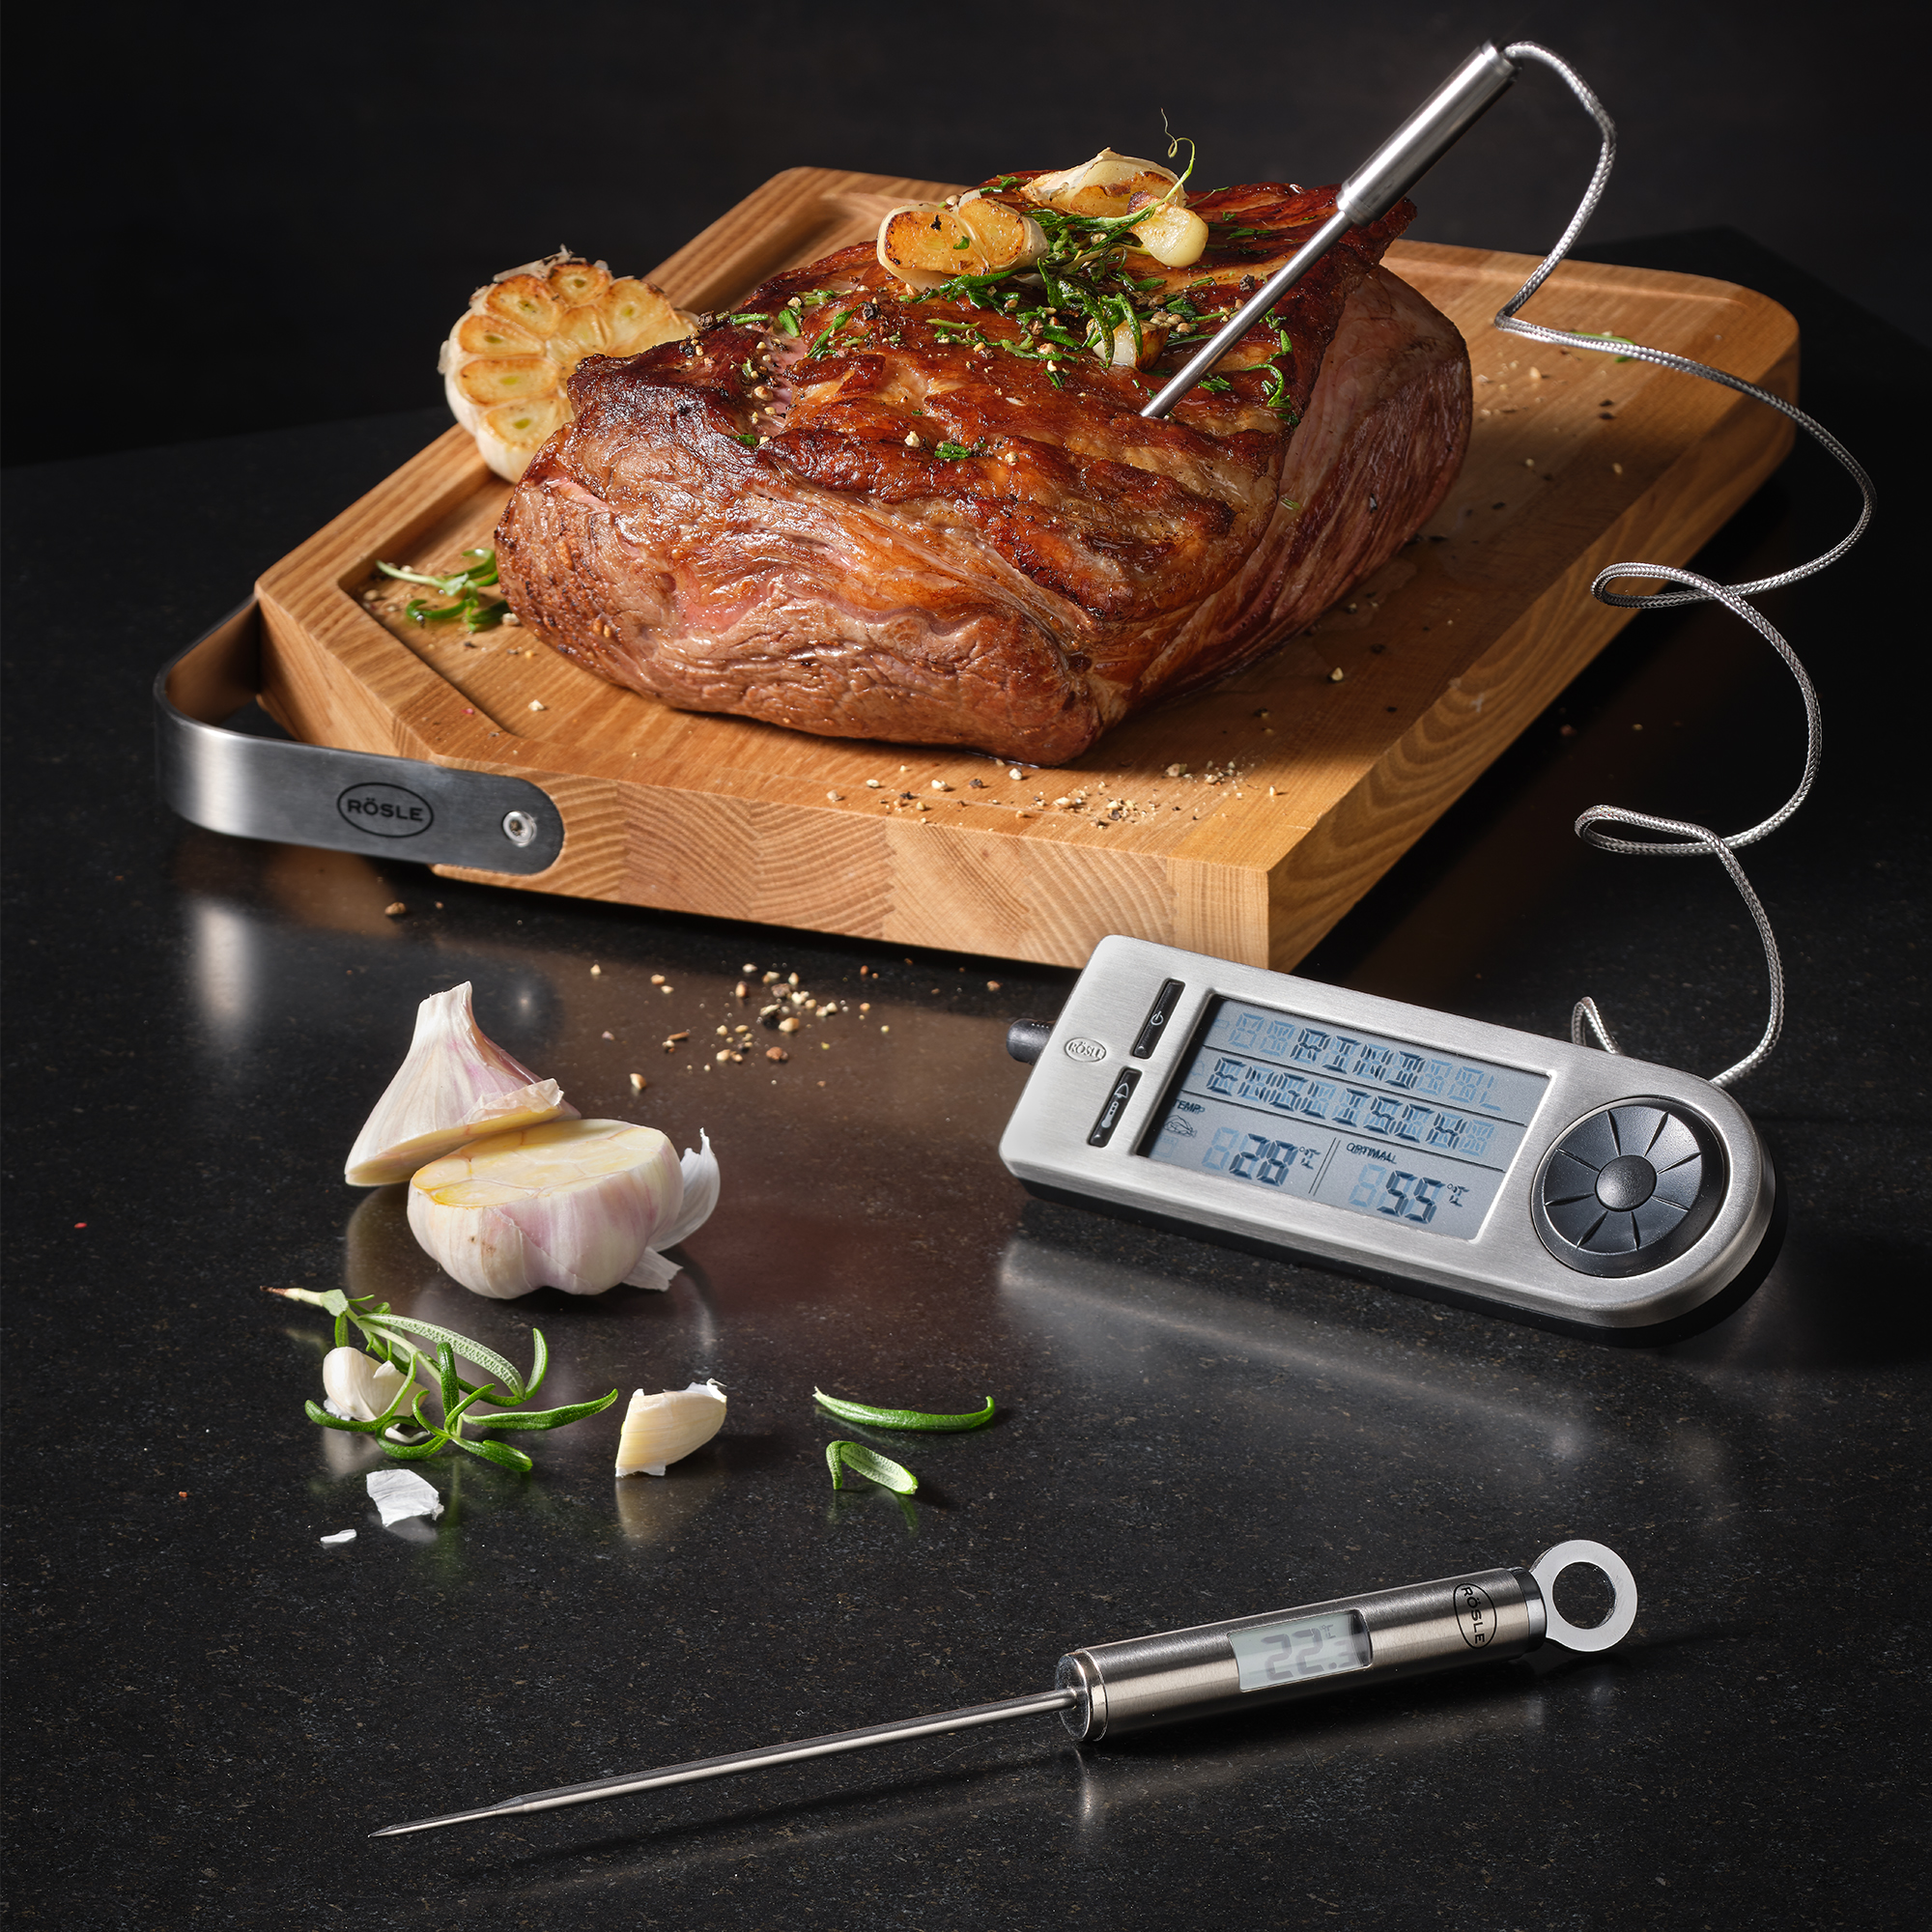 Rosle 22 cm Stainless Steel Gourmet Thermometer 